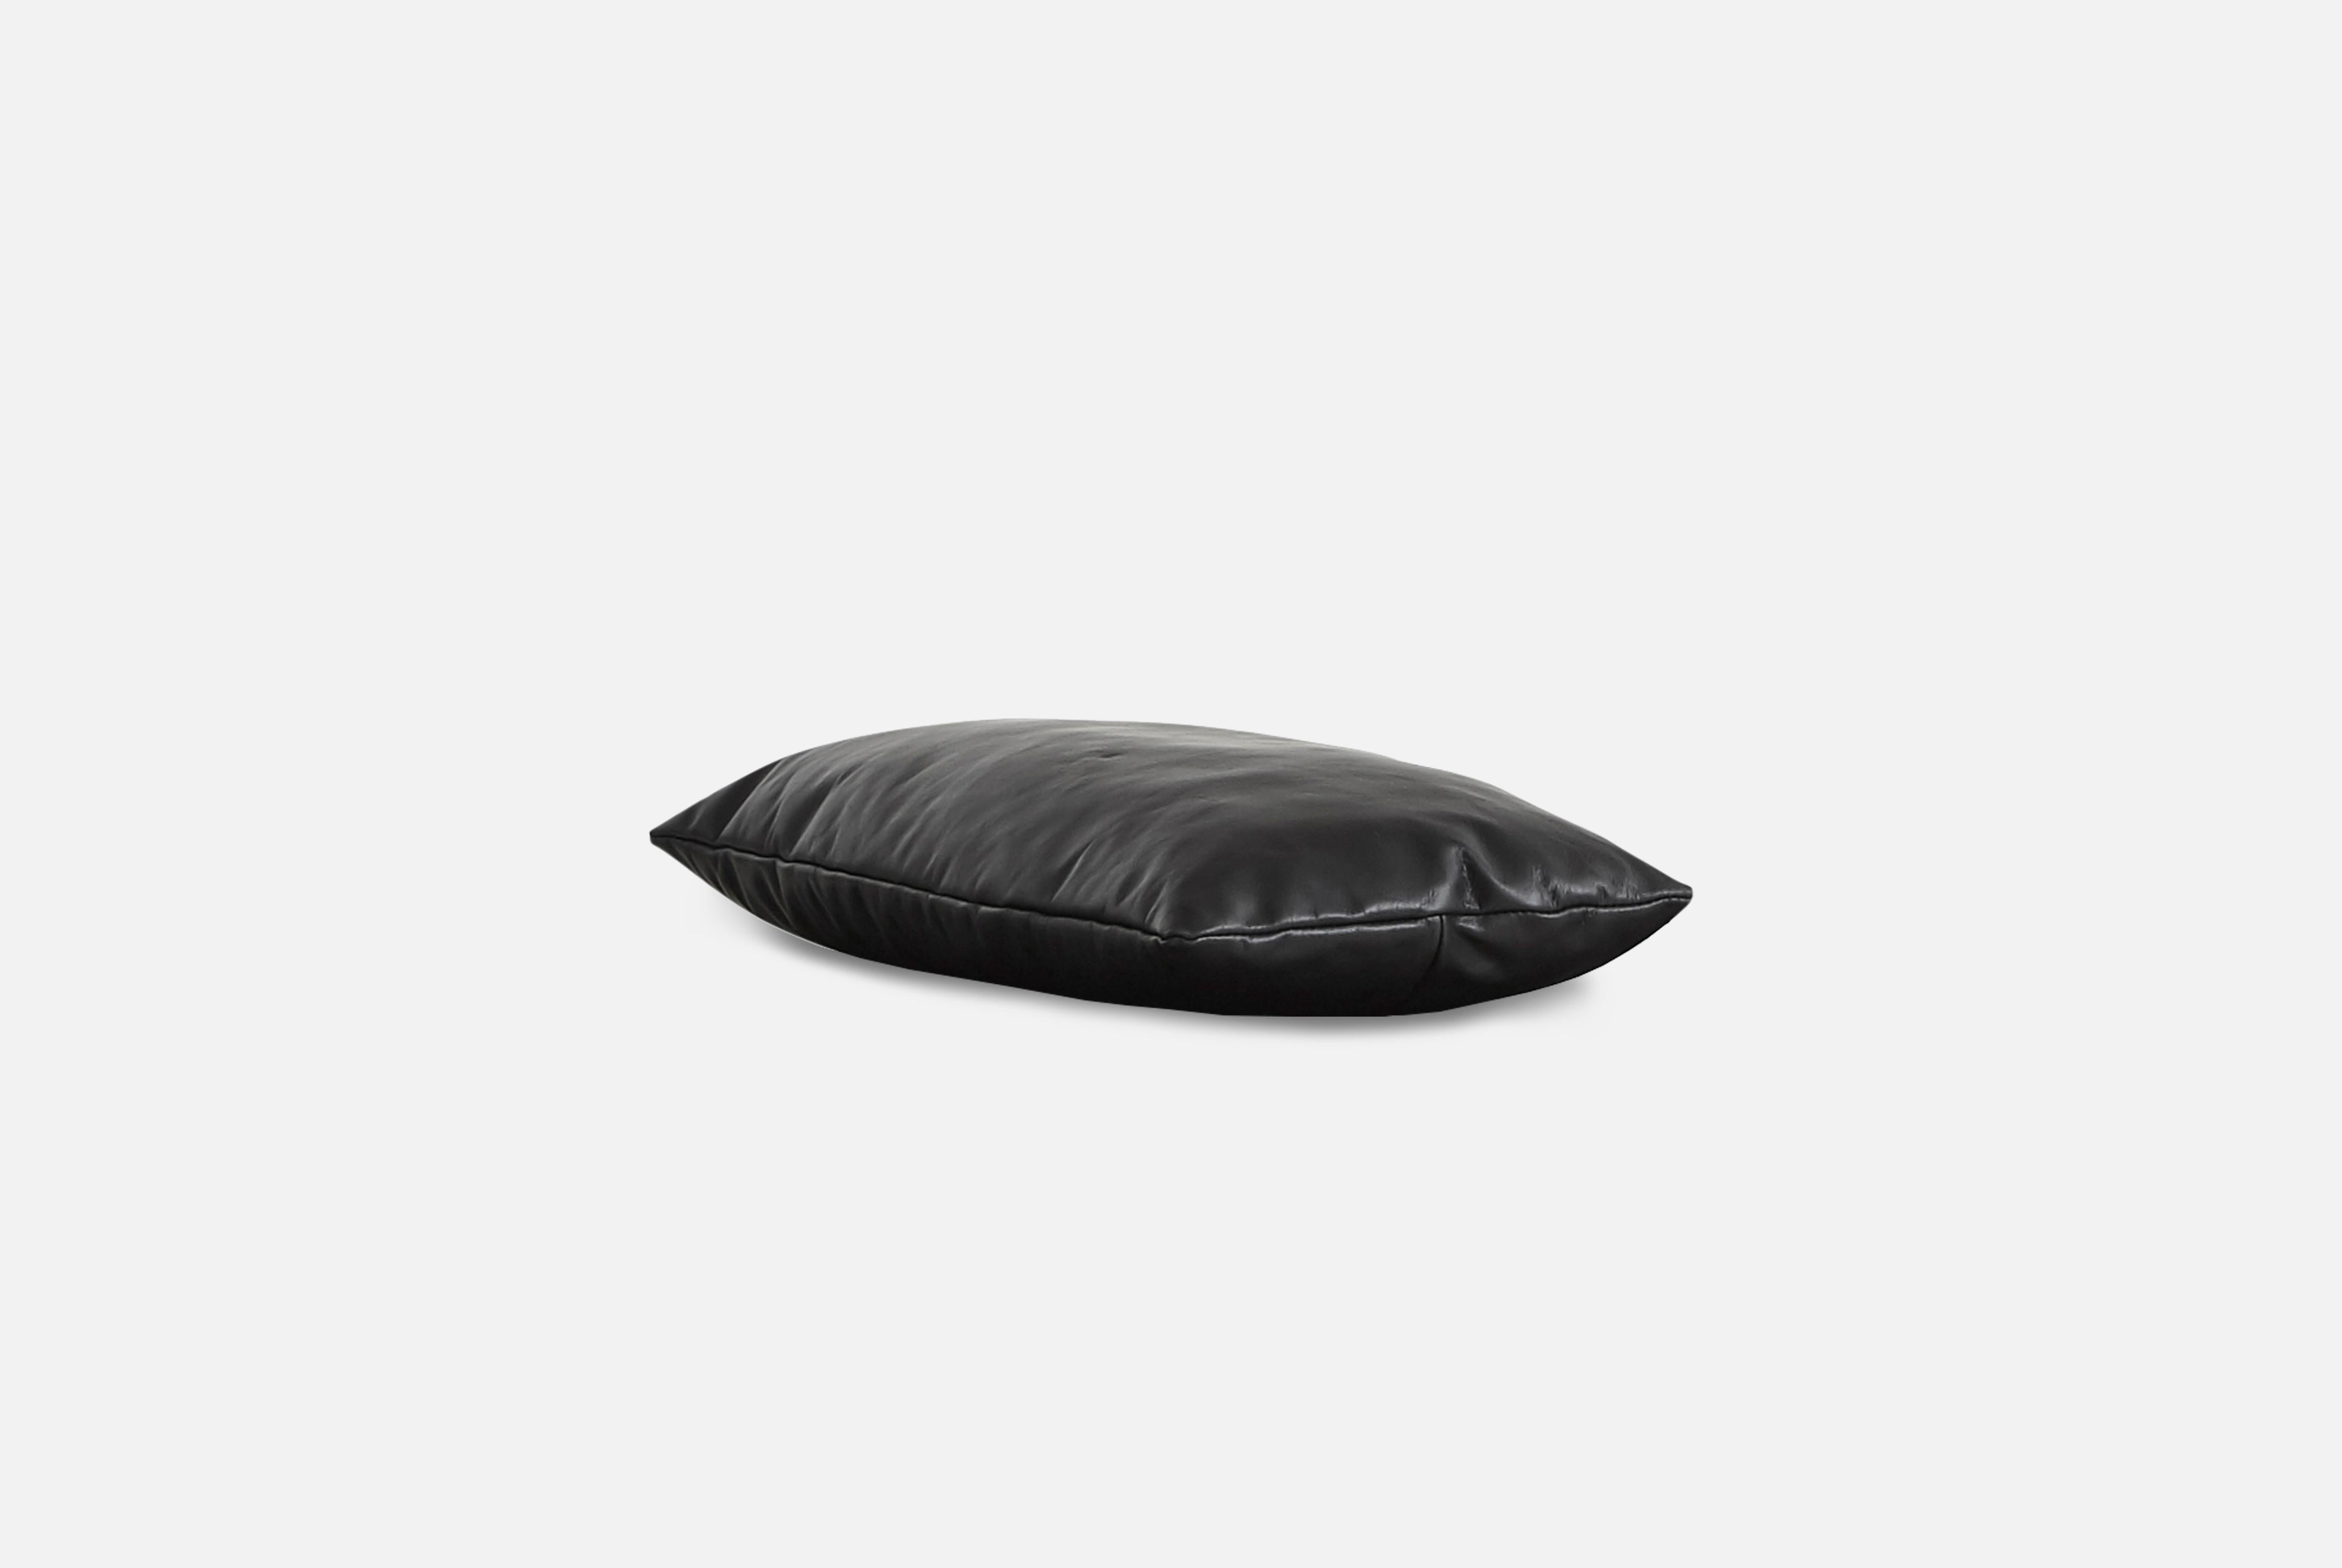 Level Pillow by Msds Studio.
Materials: Camo Leather, Fabric.
Dimensions: D 23.5 x W 67 x H 8.5 cm.

The founders, Mia and Torben Koed, decided to put their 30 years of experience into a new project. It was time for a change and a new challenge.